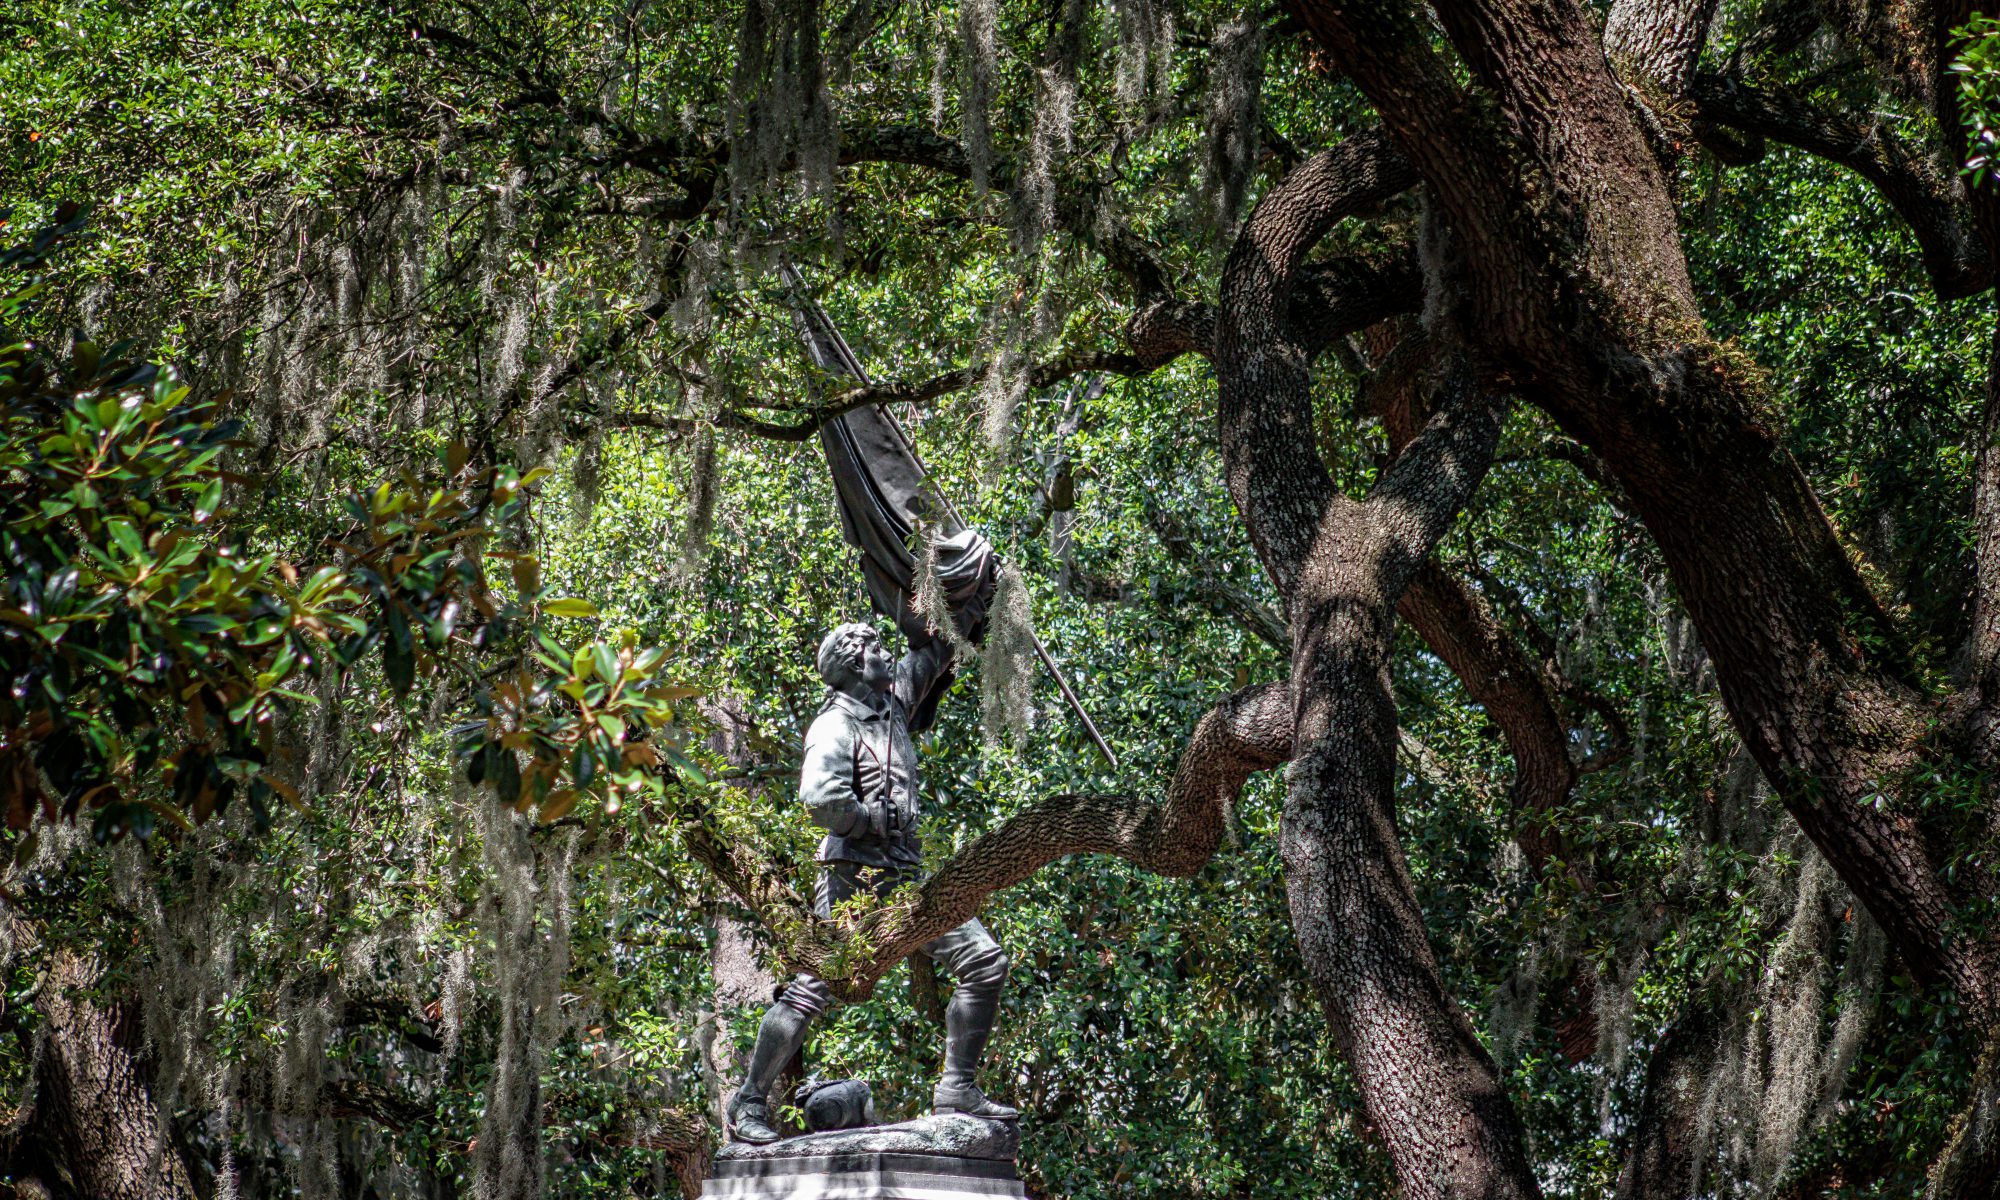 Historic Downtown Savannah is one of the most haunted places in America